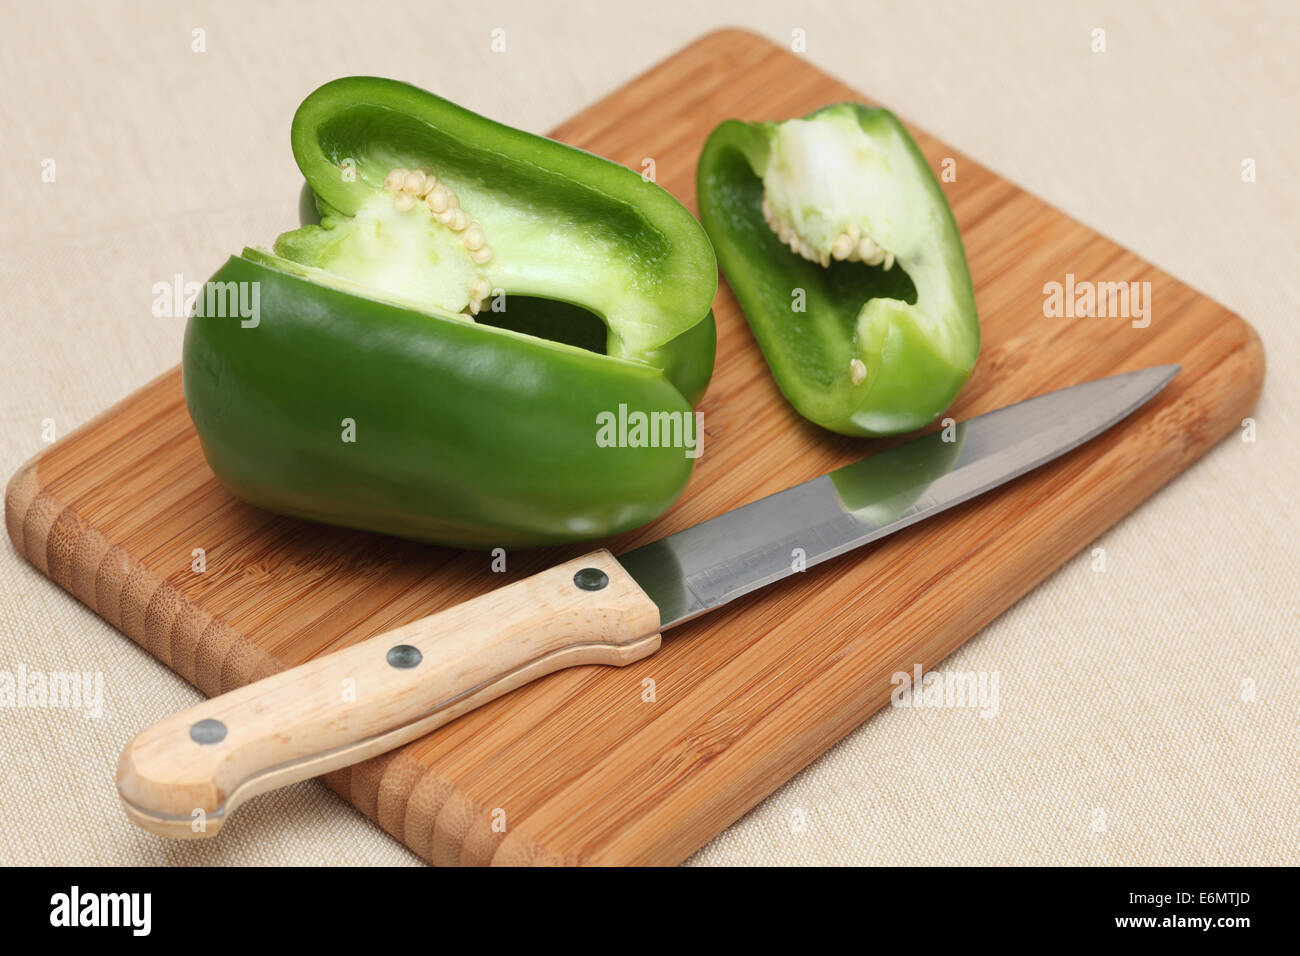 Green bell pepper on a cutting board with knife. Stock Photo